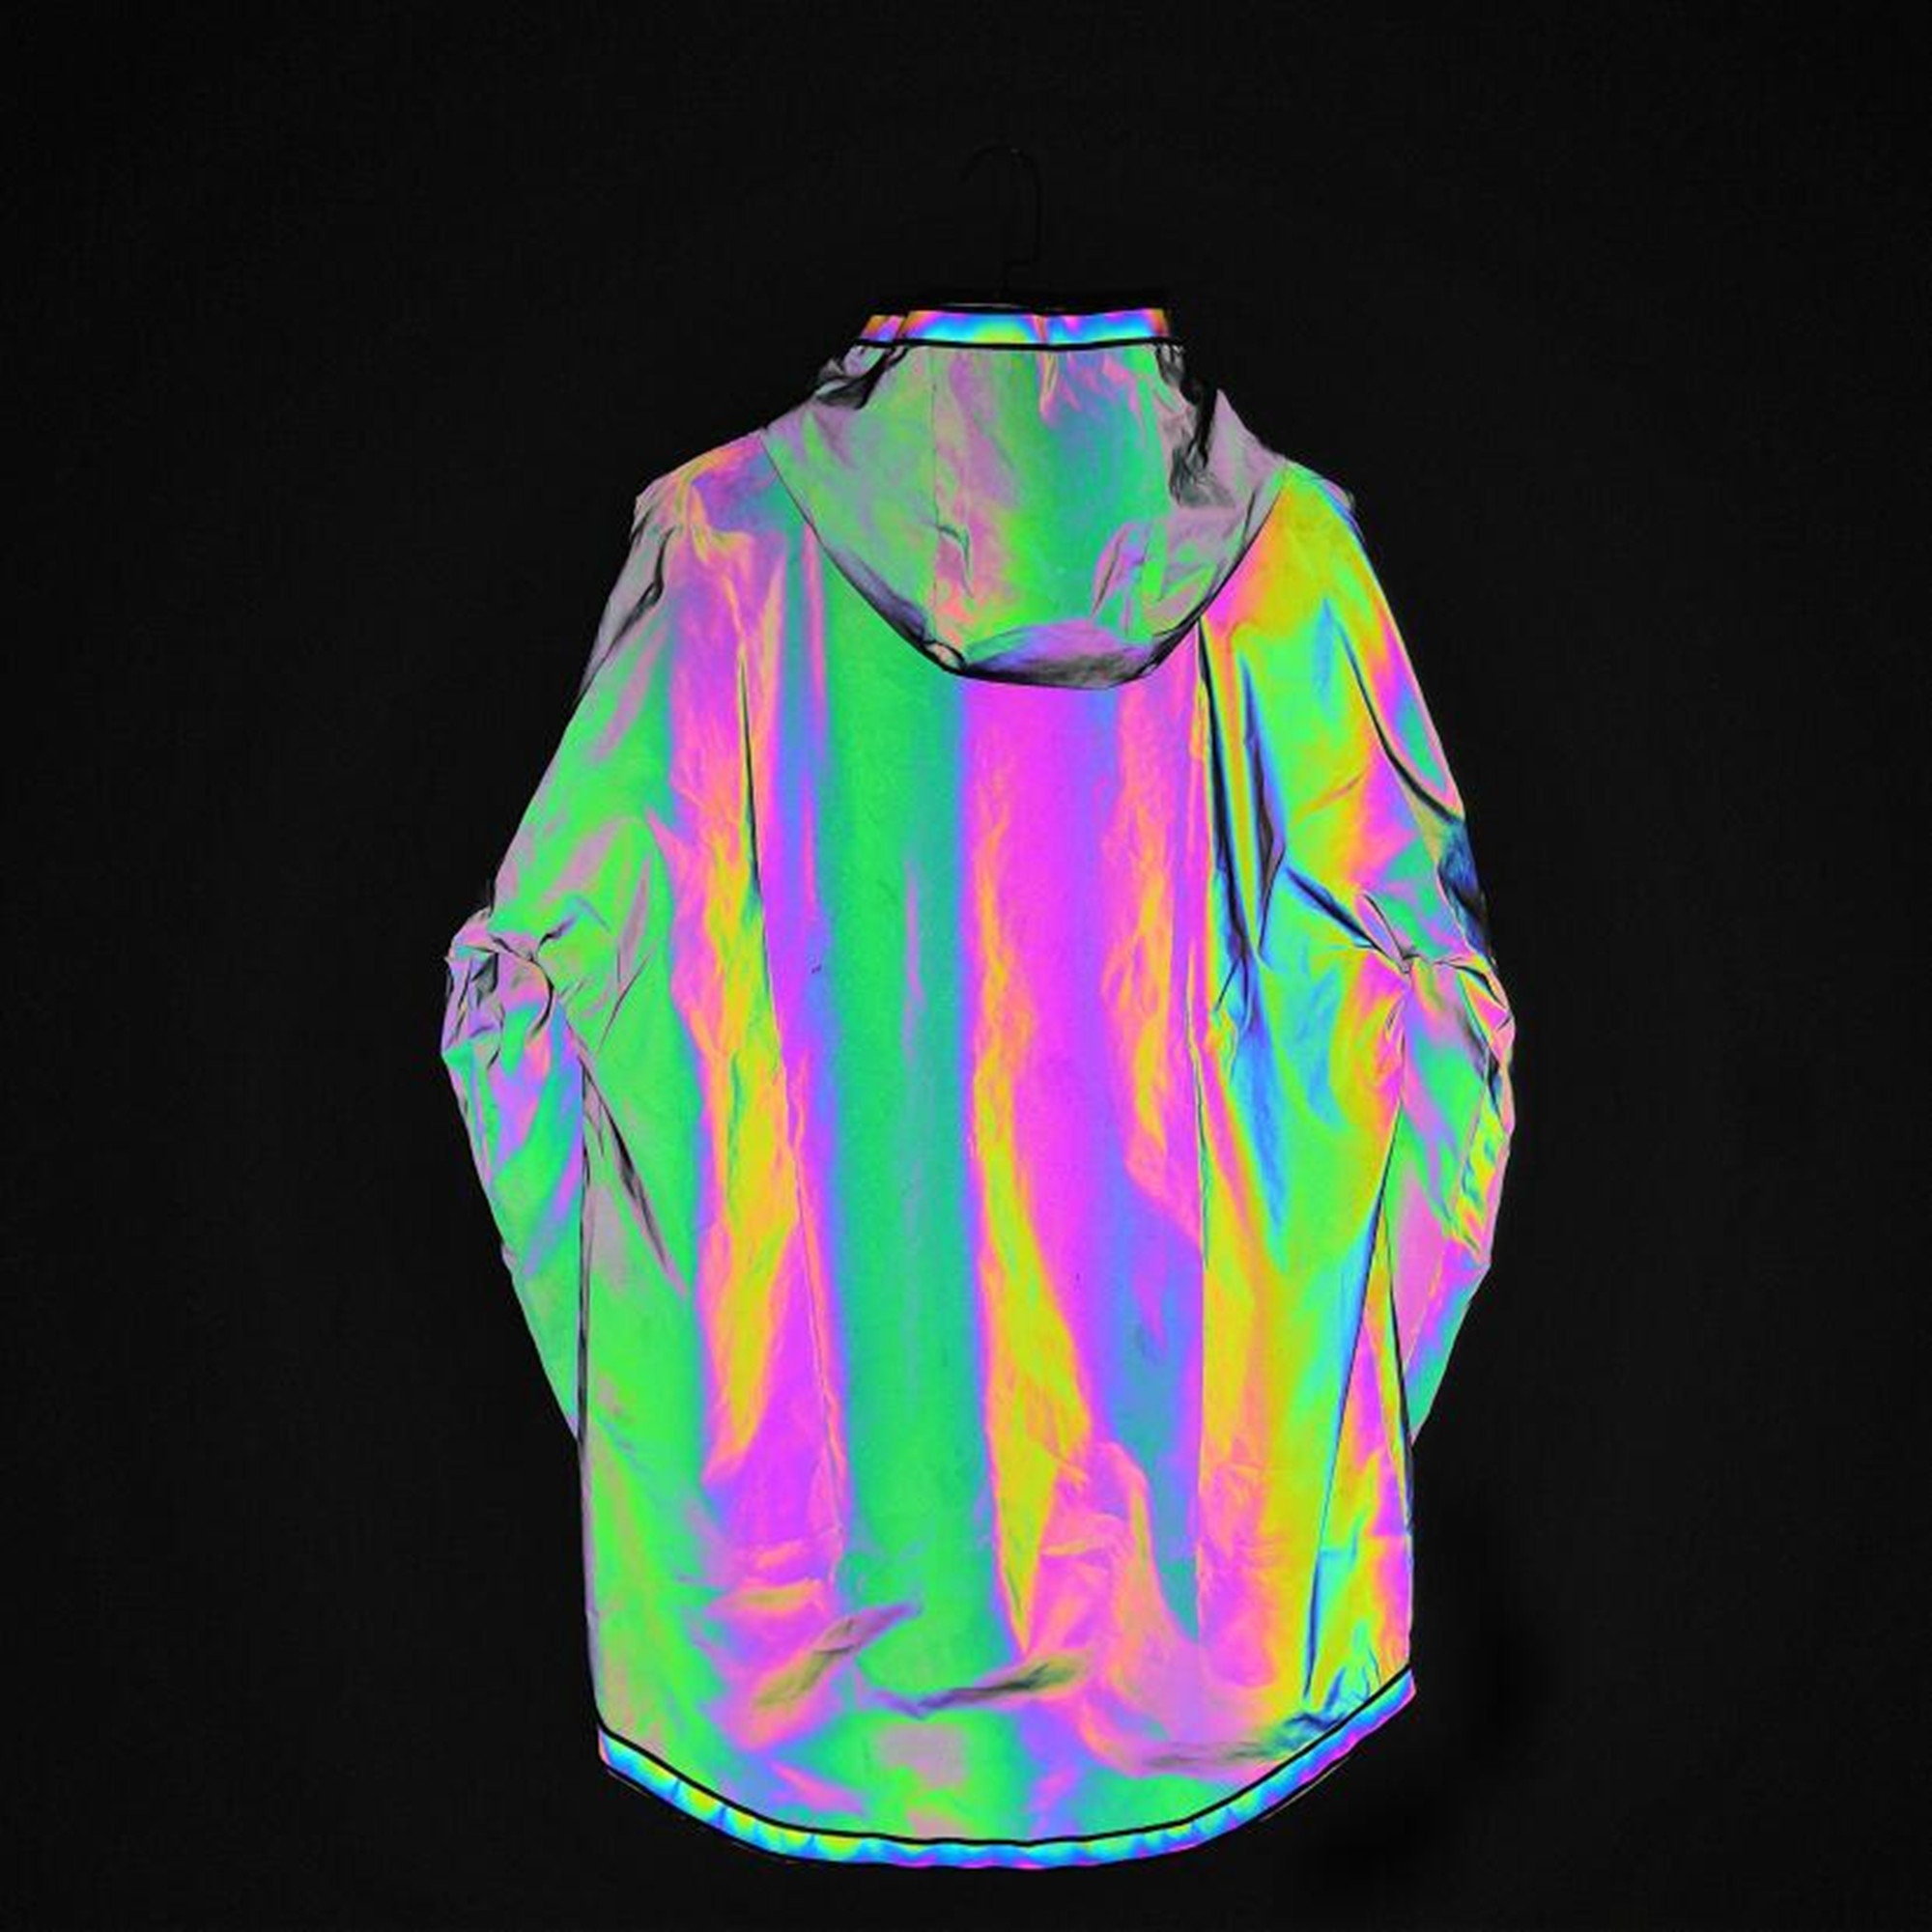 Men's Tracksuit Rave Clothing, Unique Reflective Rainbow Garments,  Outstanding Festival Clothing, Eye Catching Track Jacket & Pants -   Denmark